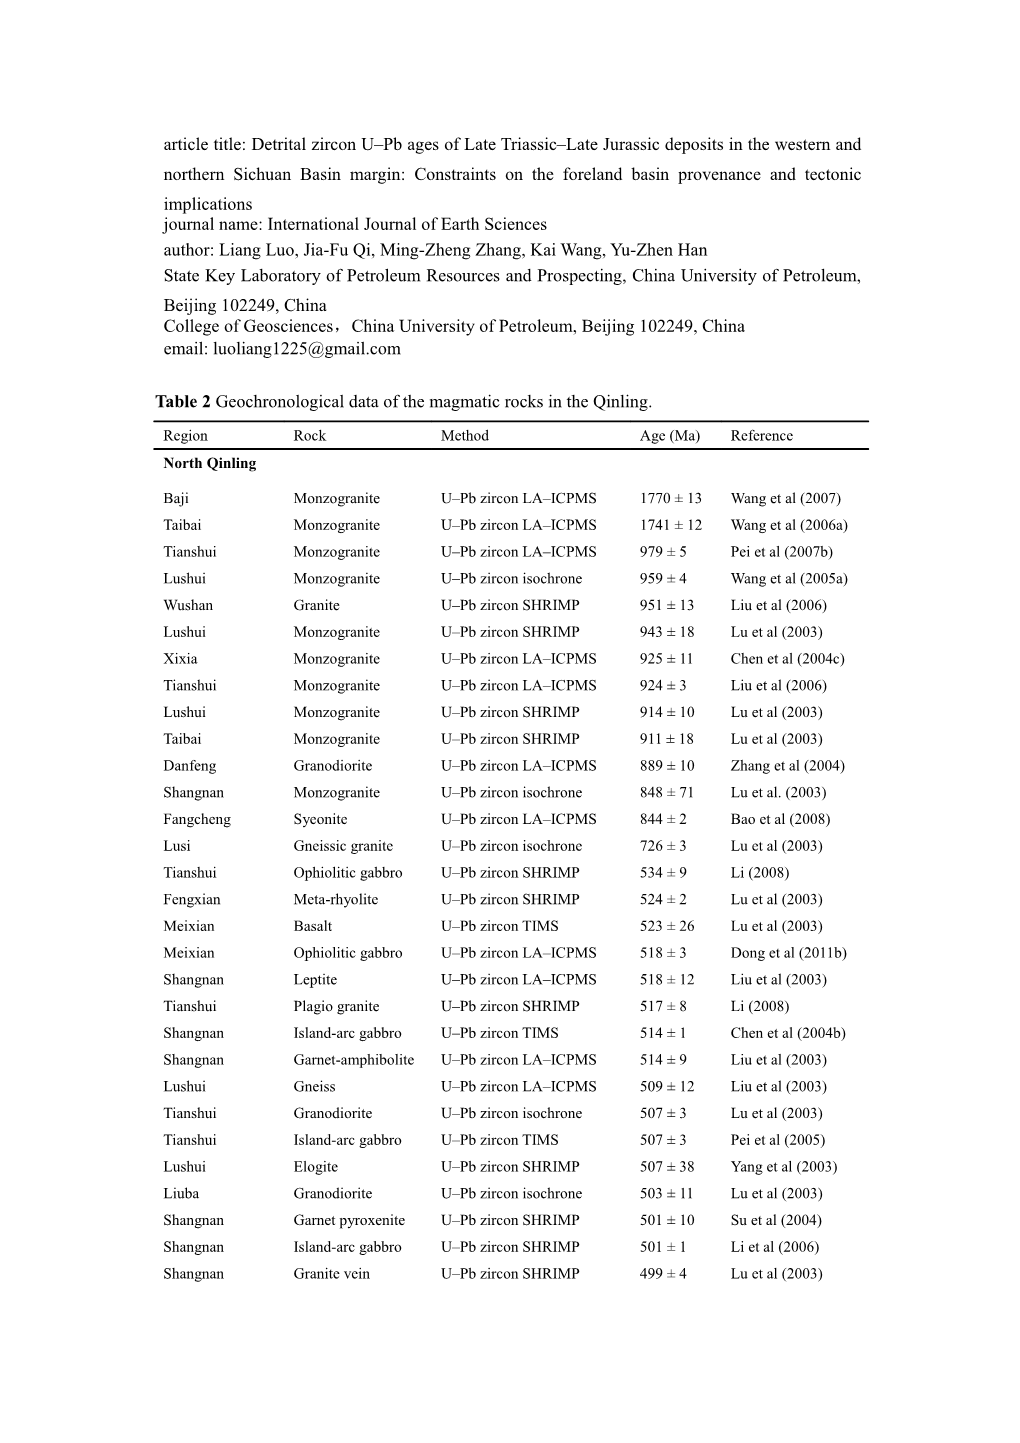 Table 2Geochronological Data of the Magmatic Rocks in the Qinling